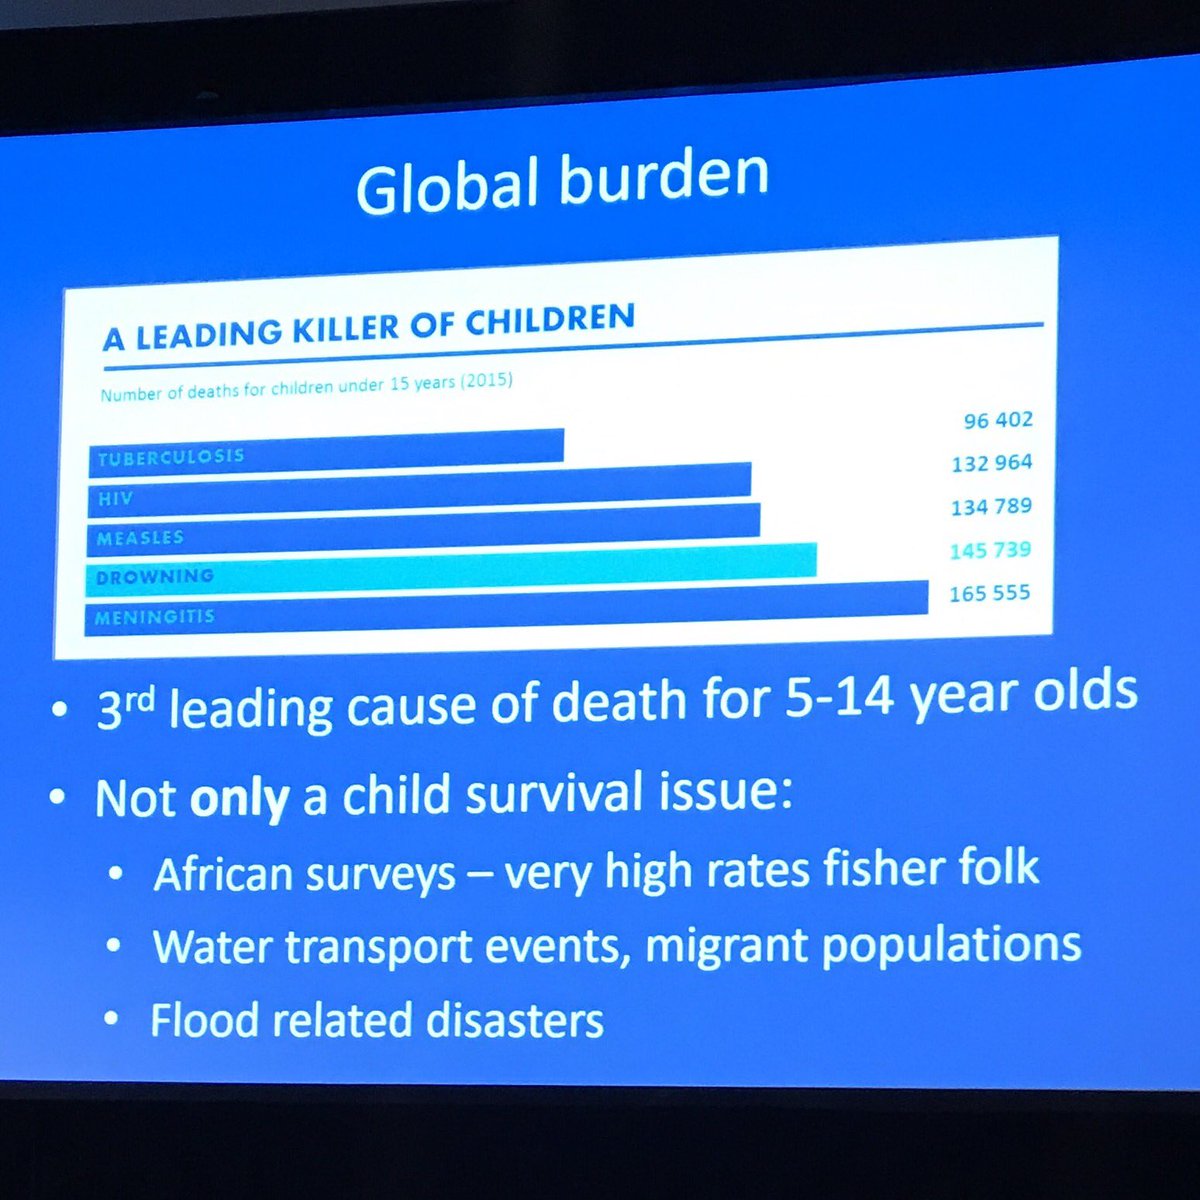 #Drowning is a #globalburden that is not only a child survival issue - Dr. David Meddings @wcdp2017 #WCDP2017 #ShareGloballyPreventLocally